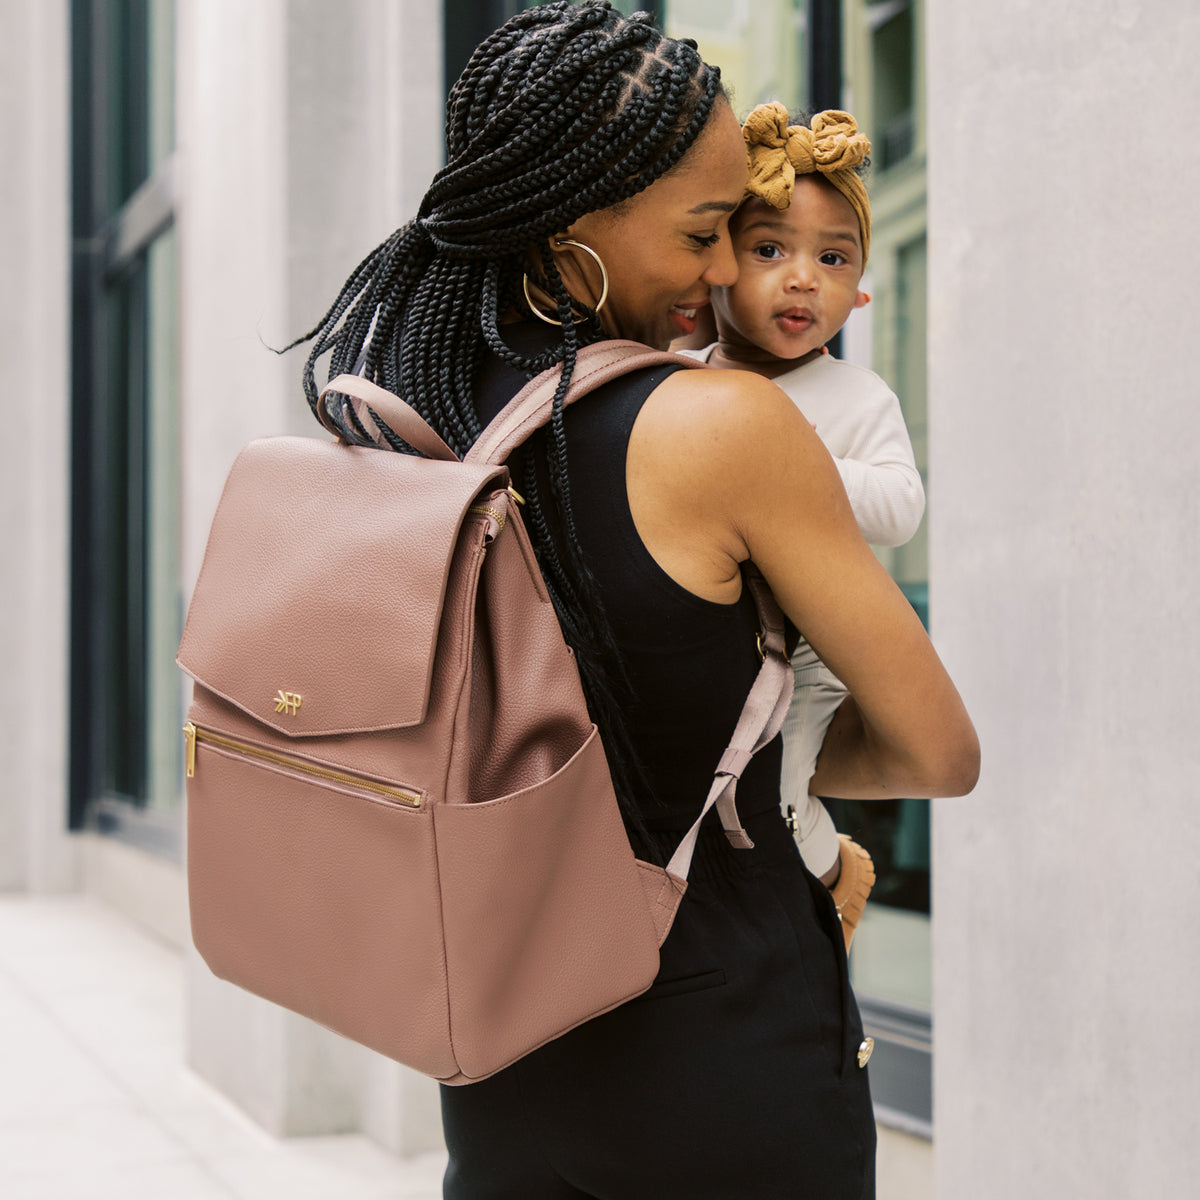 A Diaper Bag Must Have - For the Love of Matching